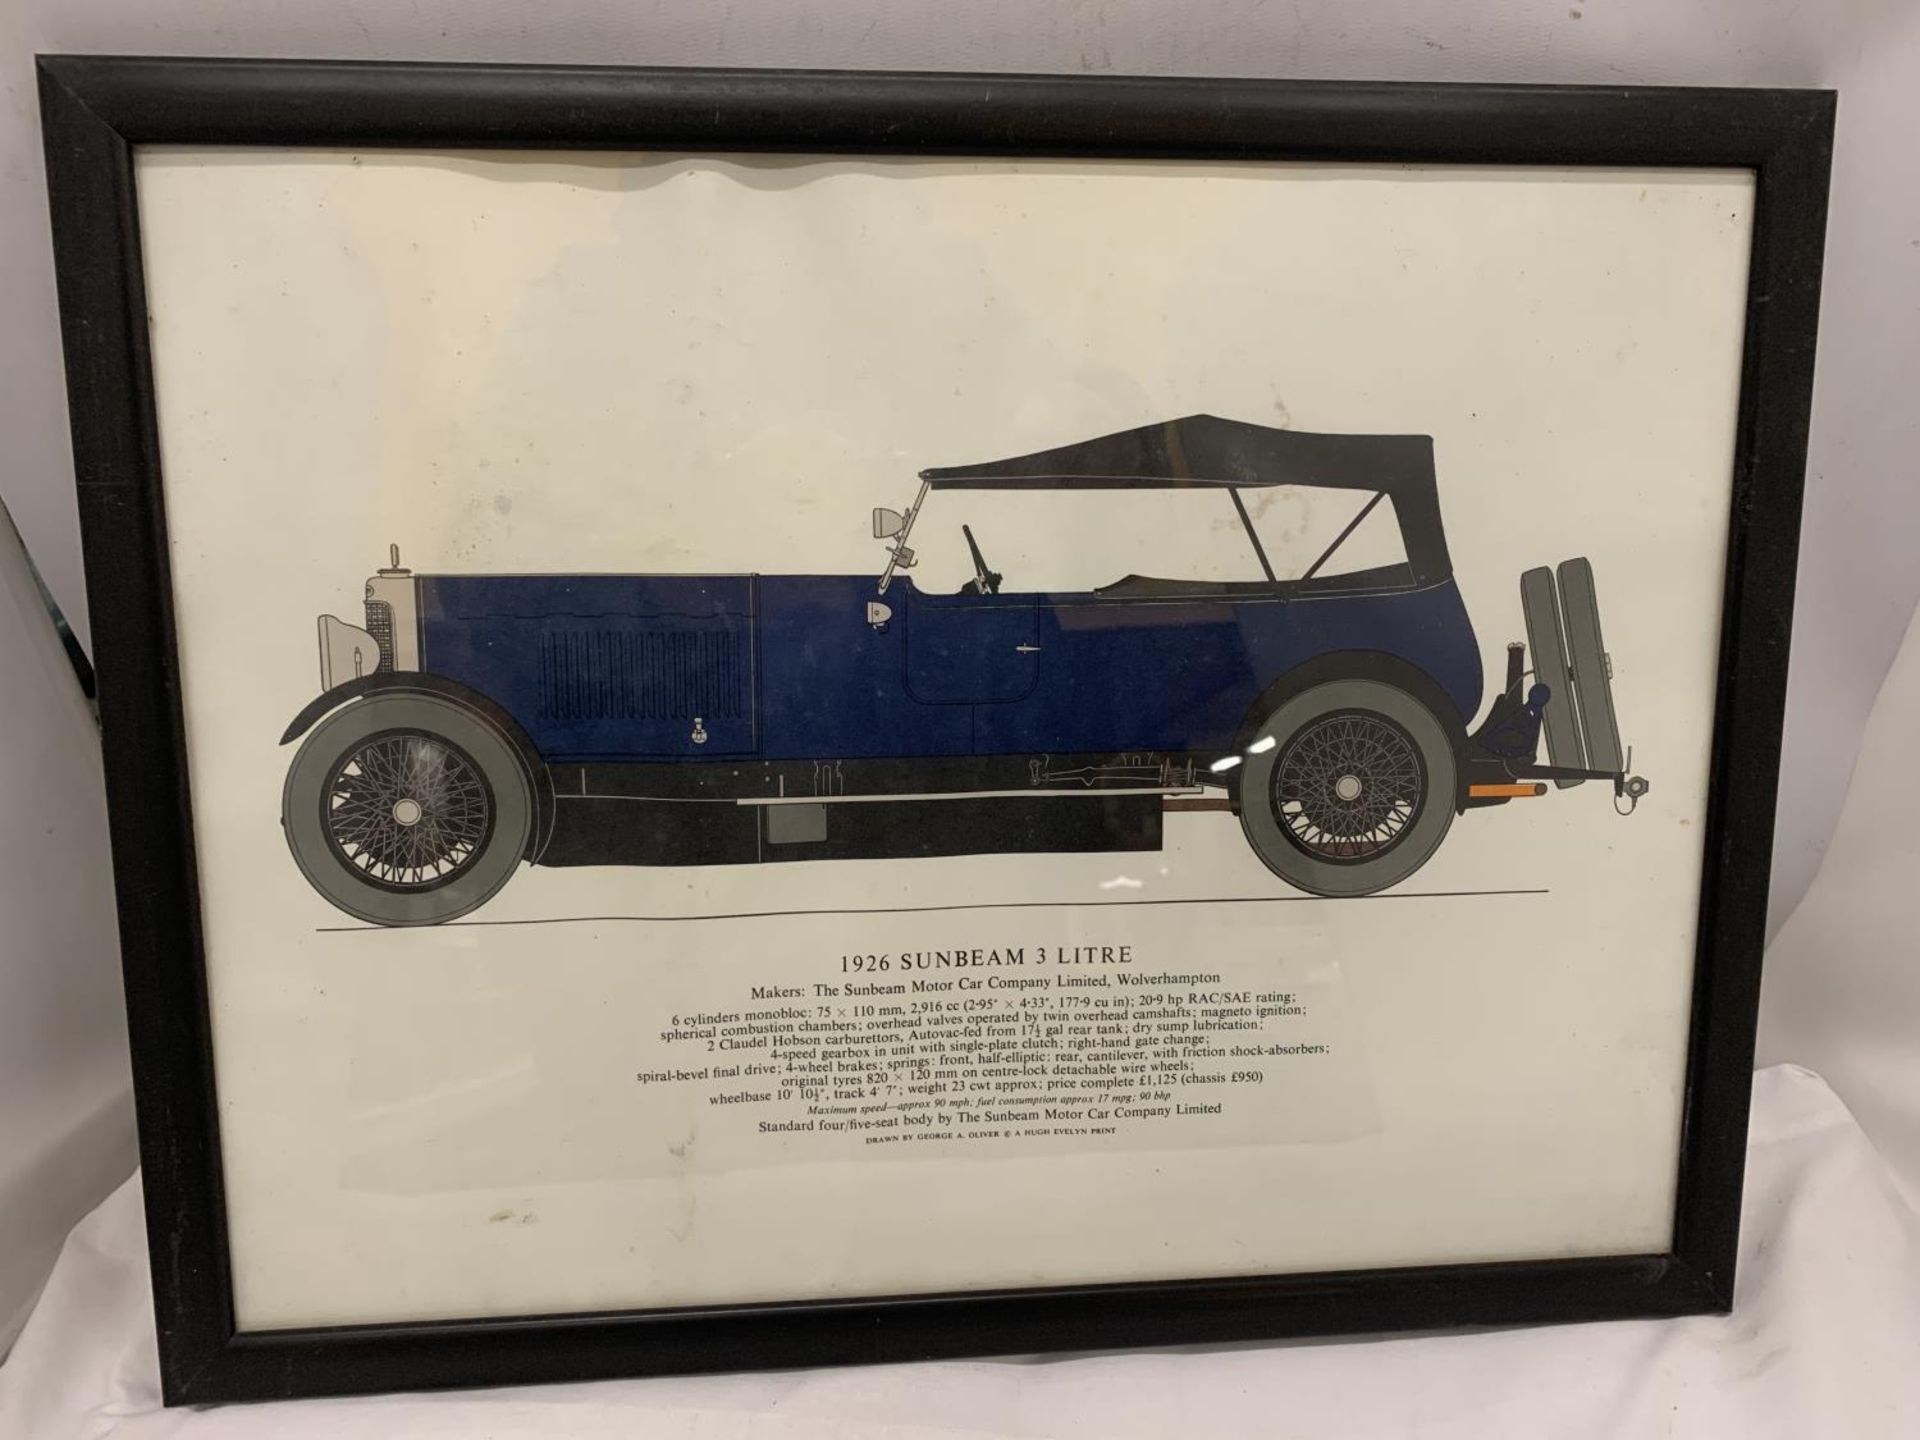 SIX FRAMED PRINTS OF VINTAGE CARS TO INCLUDE A 1930 AUSTIN 7 'ULSTER', 1926 SUNBEAM 3 LITRE, ETC - Image 2 of 7